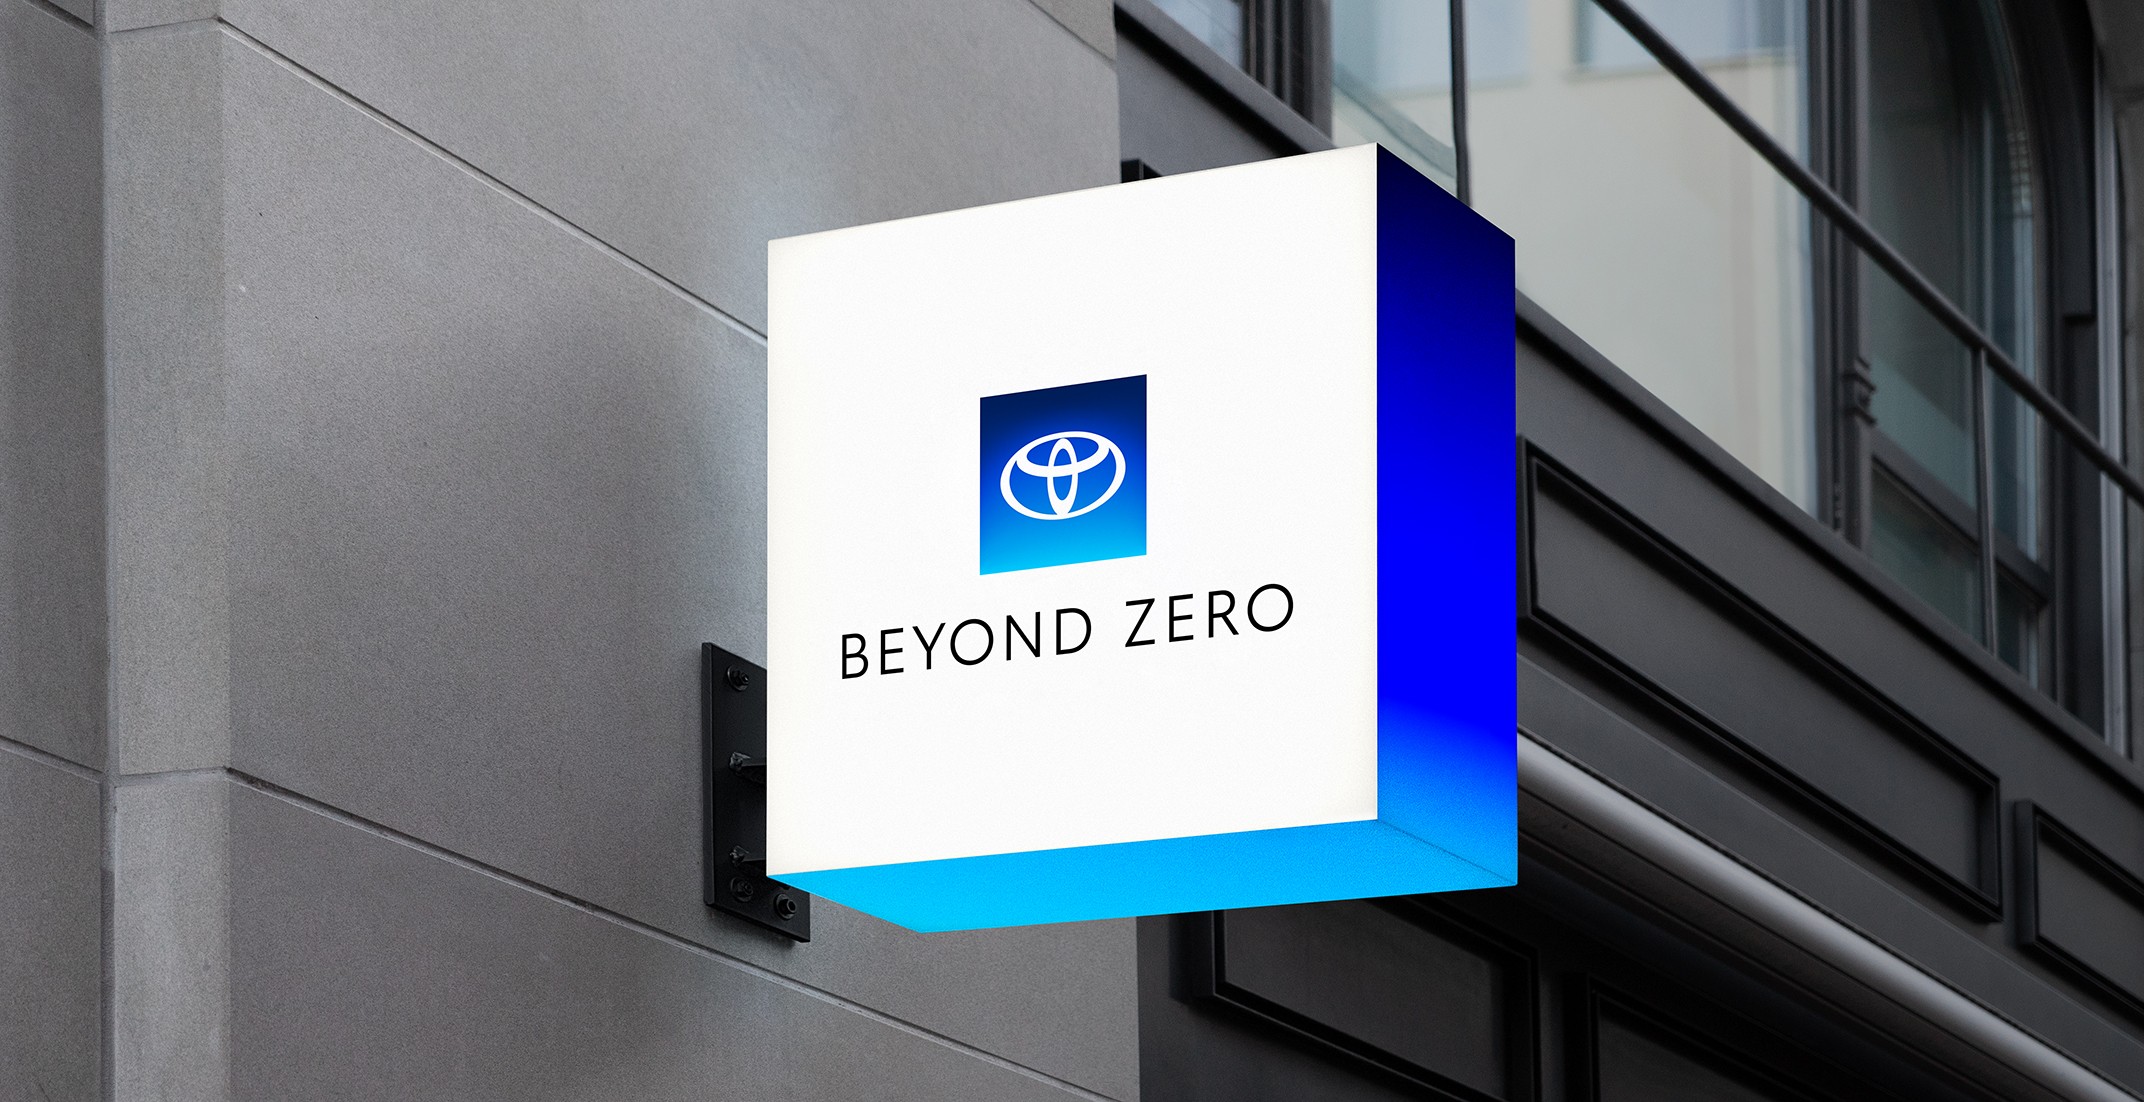 A lit sign on a building with the Beyond Zero logo and blue gradient.